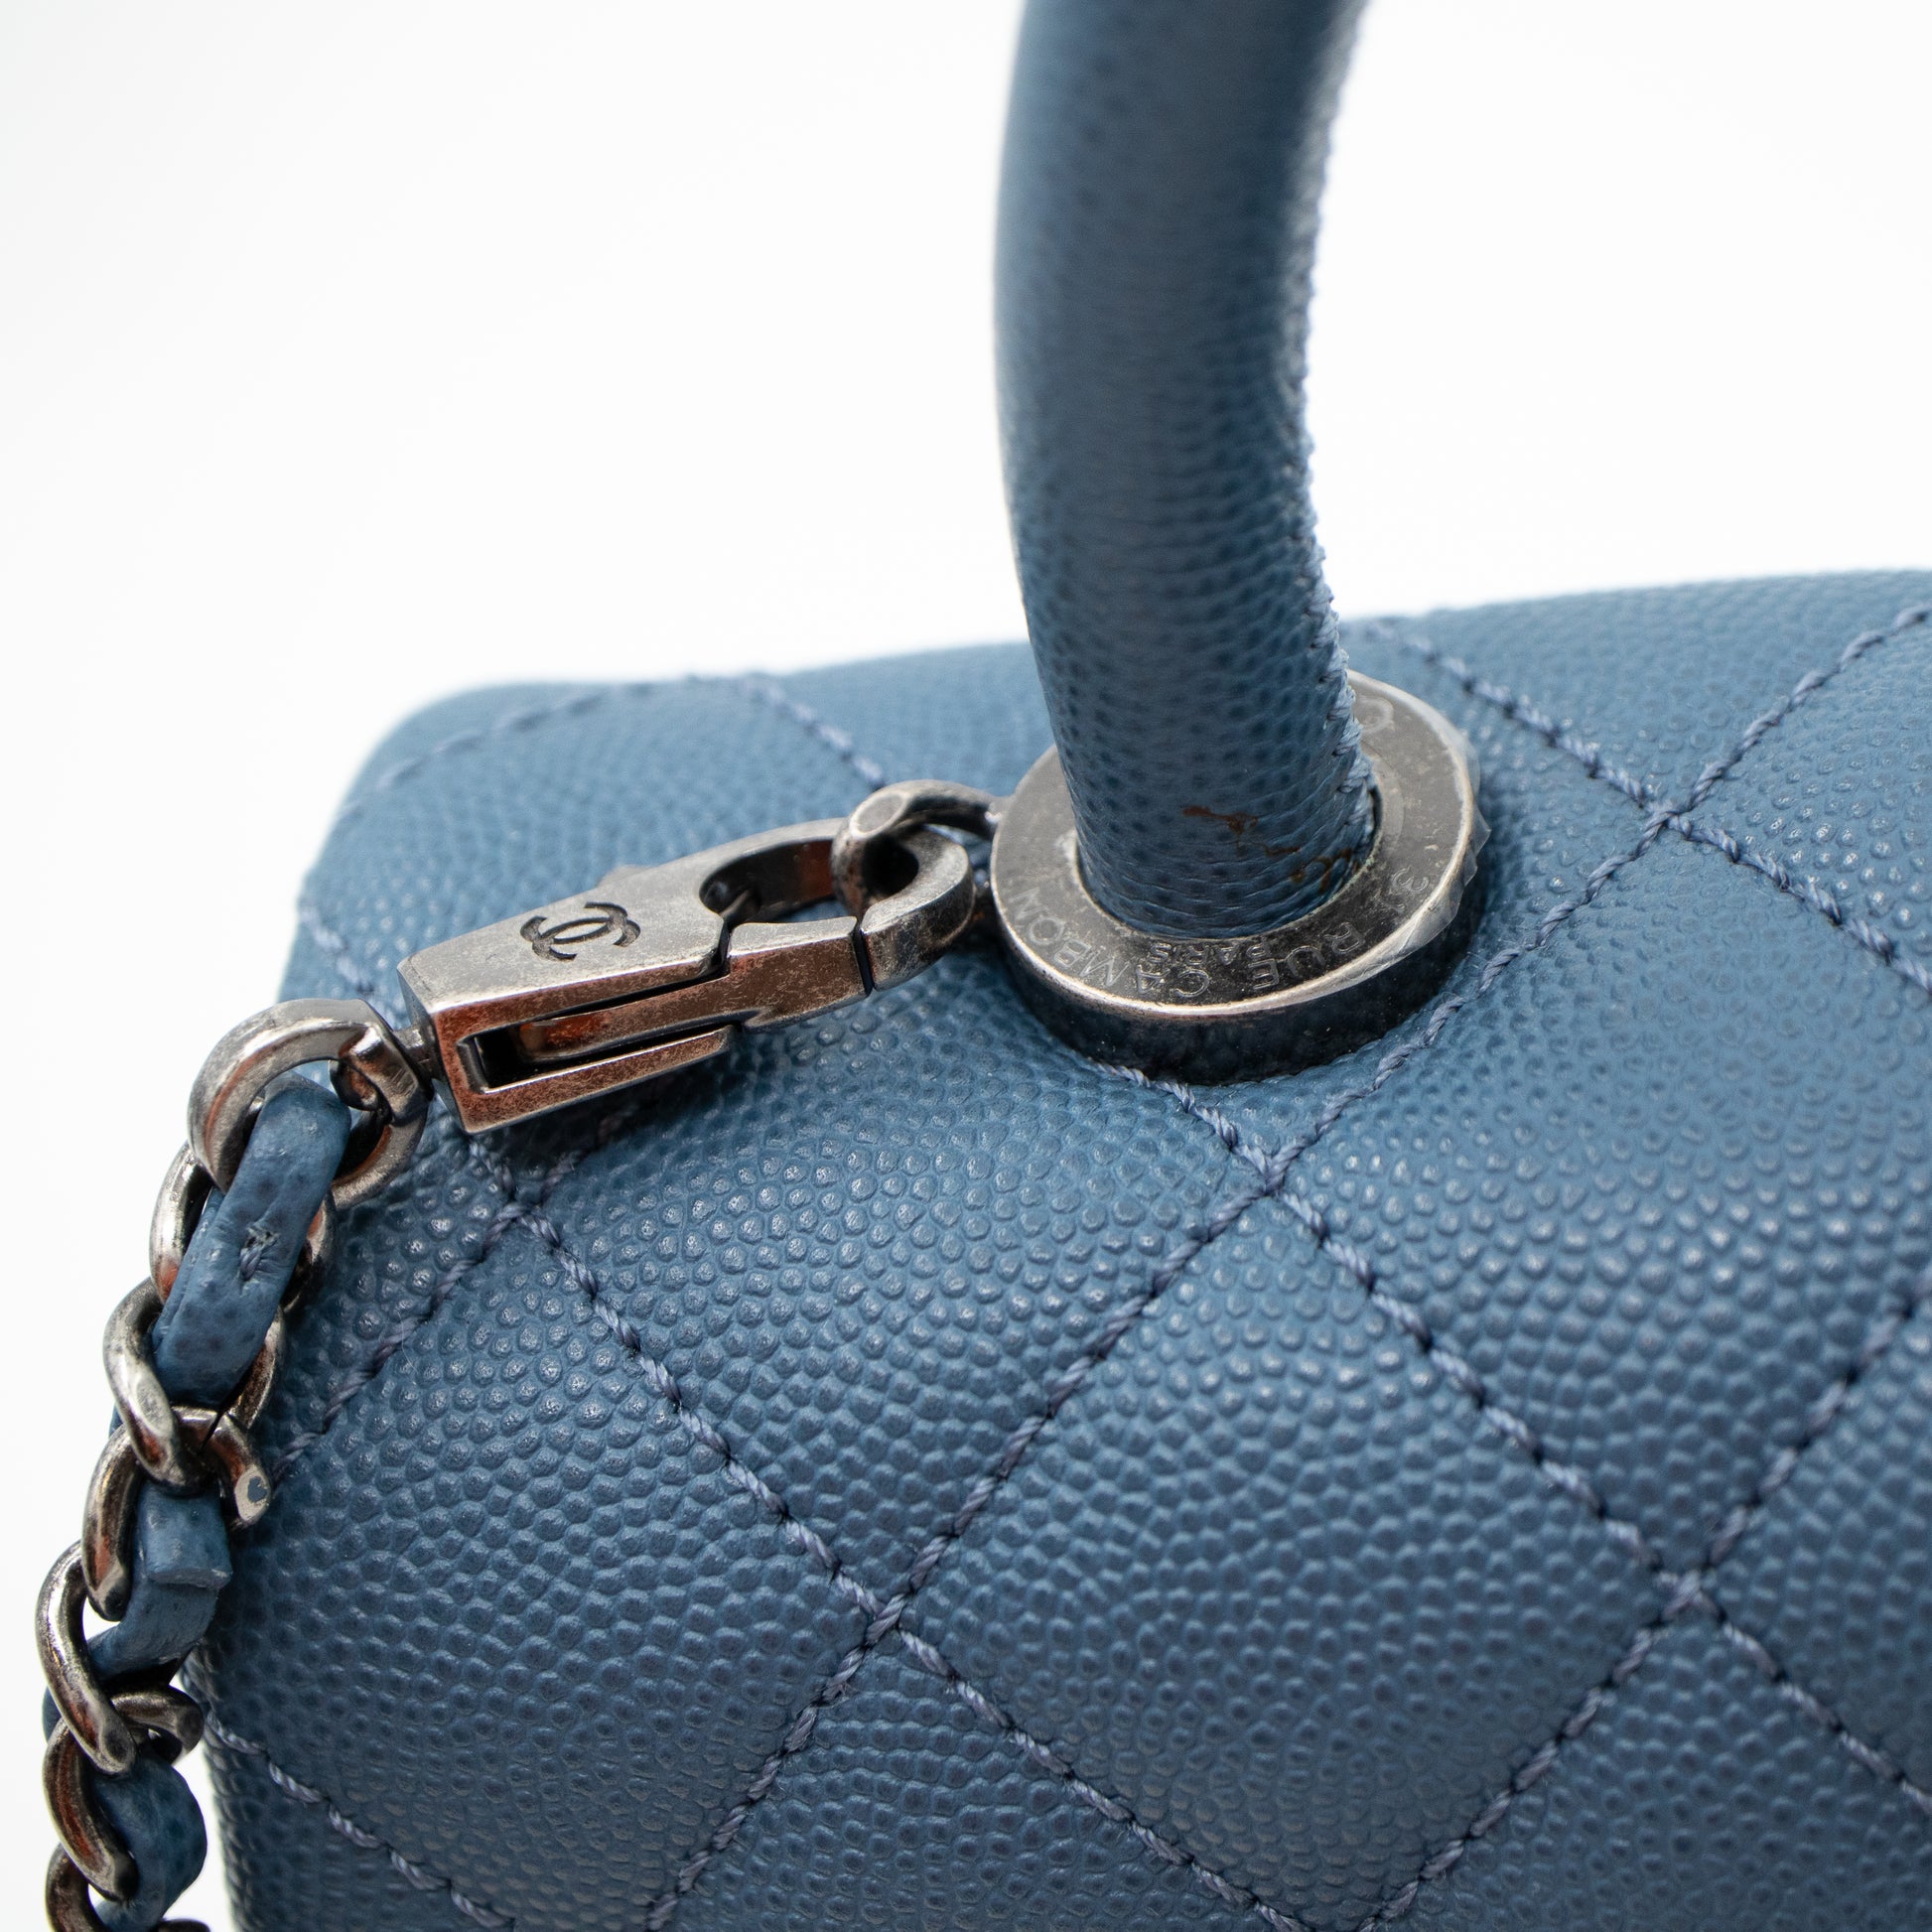 Chanel Coco Handle Mini, Navy Blue Caviar Leather with Ruthenium